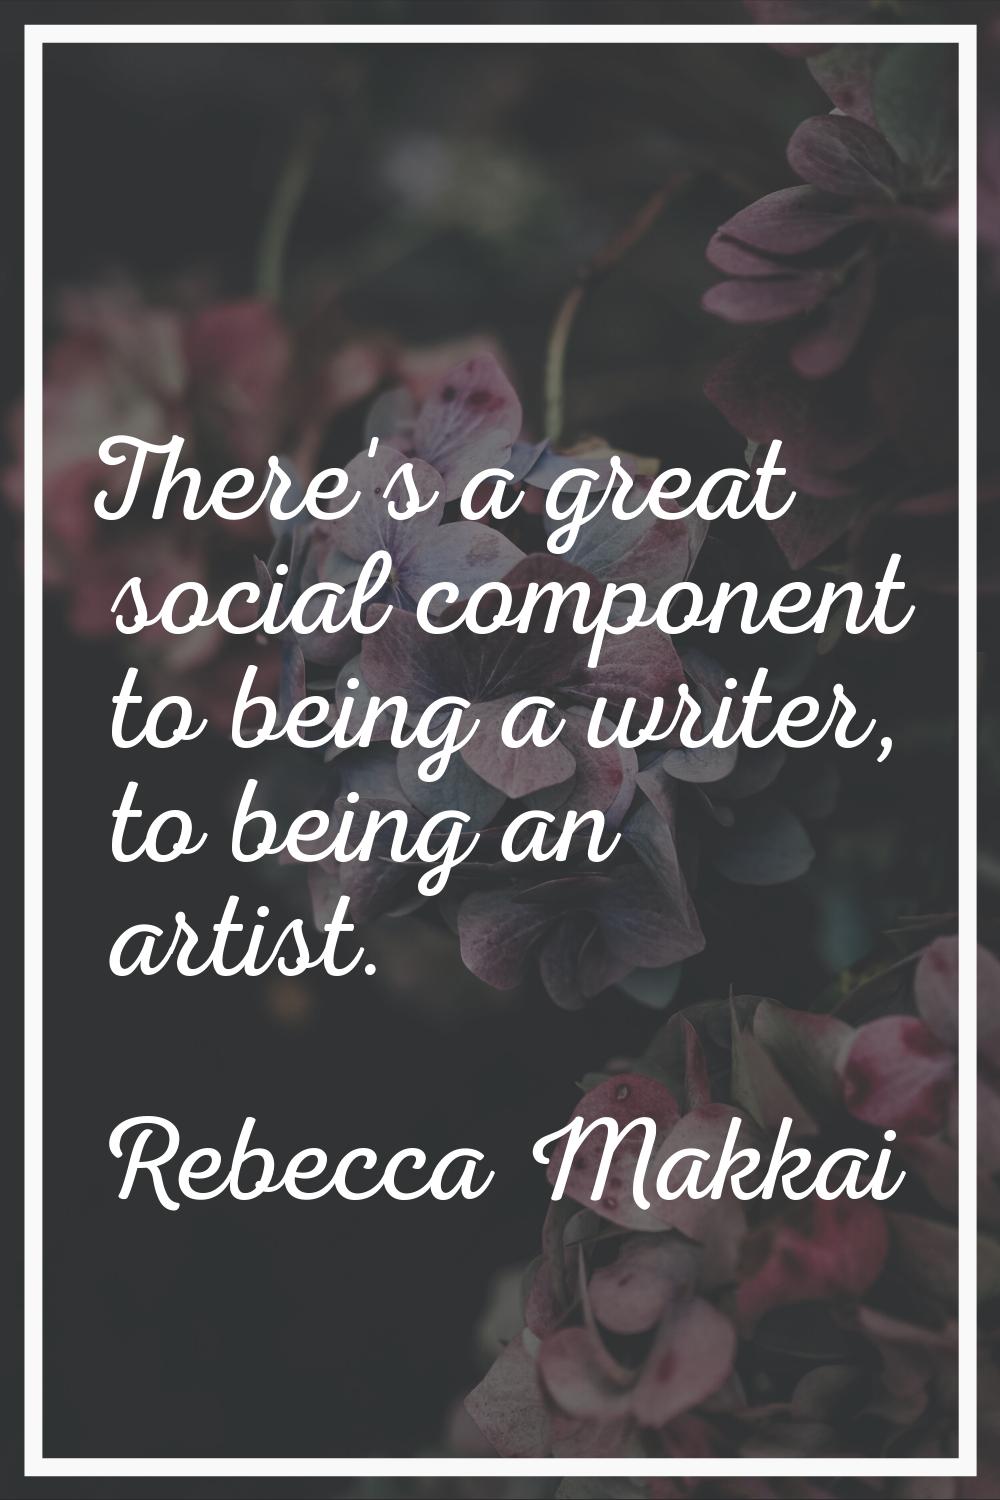 There's a great social component to being a writer, to being an artist.